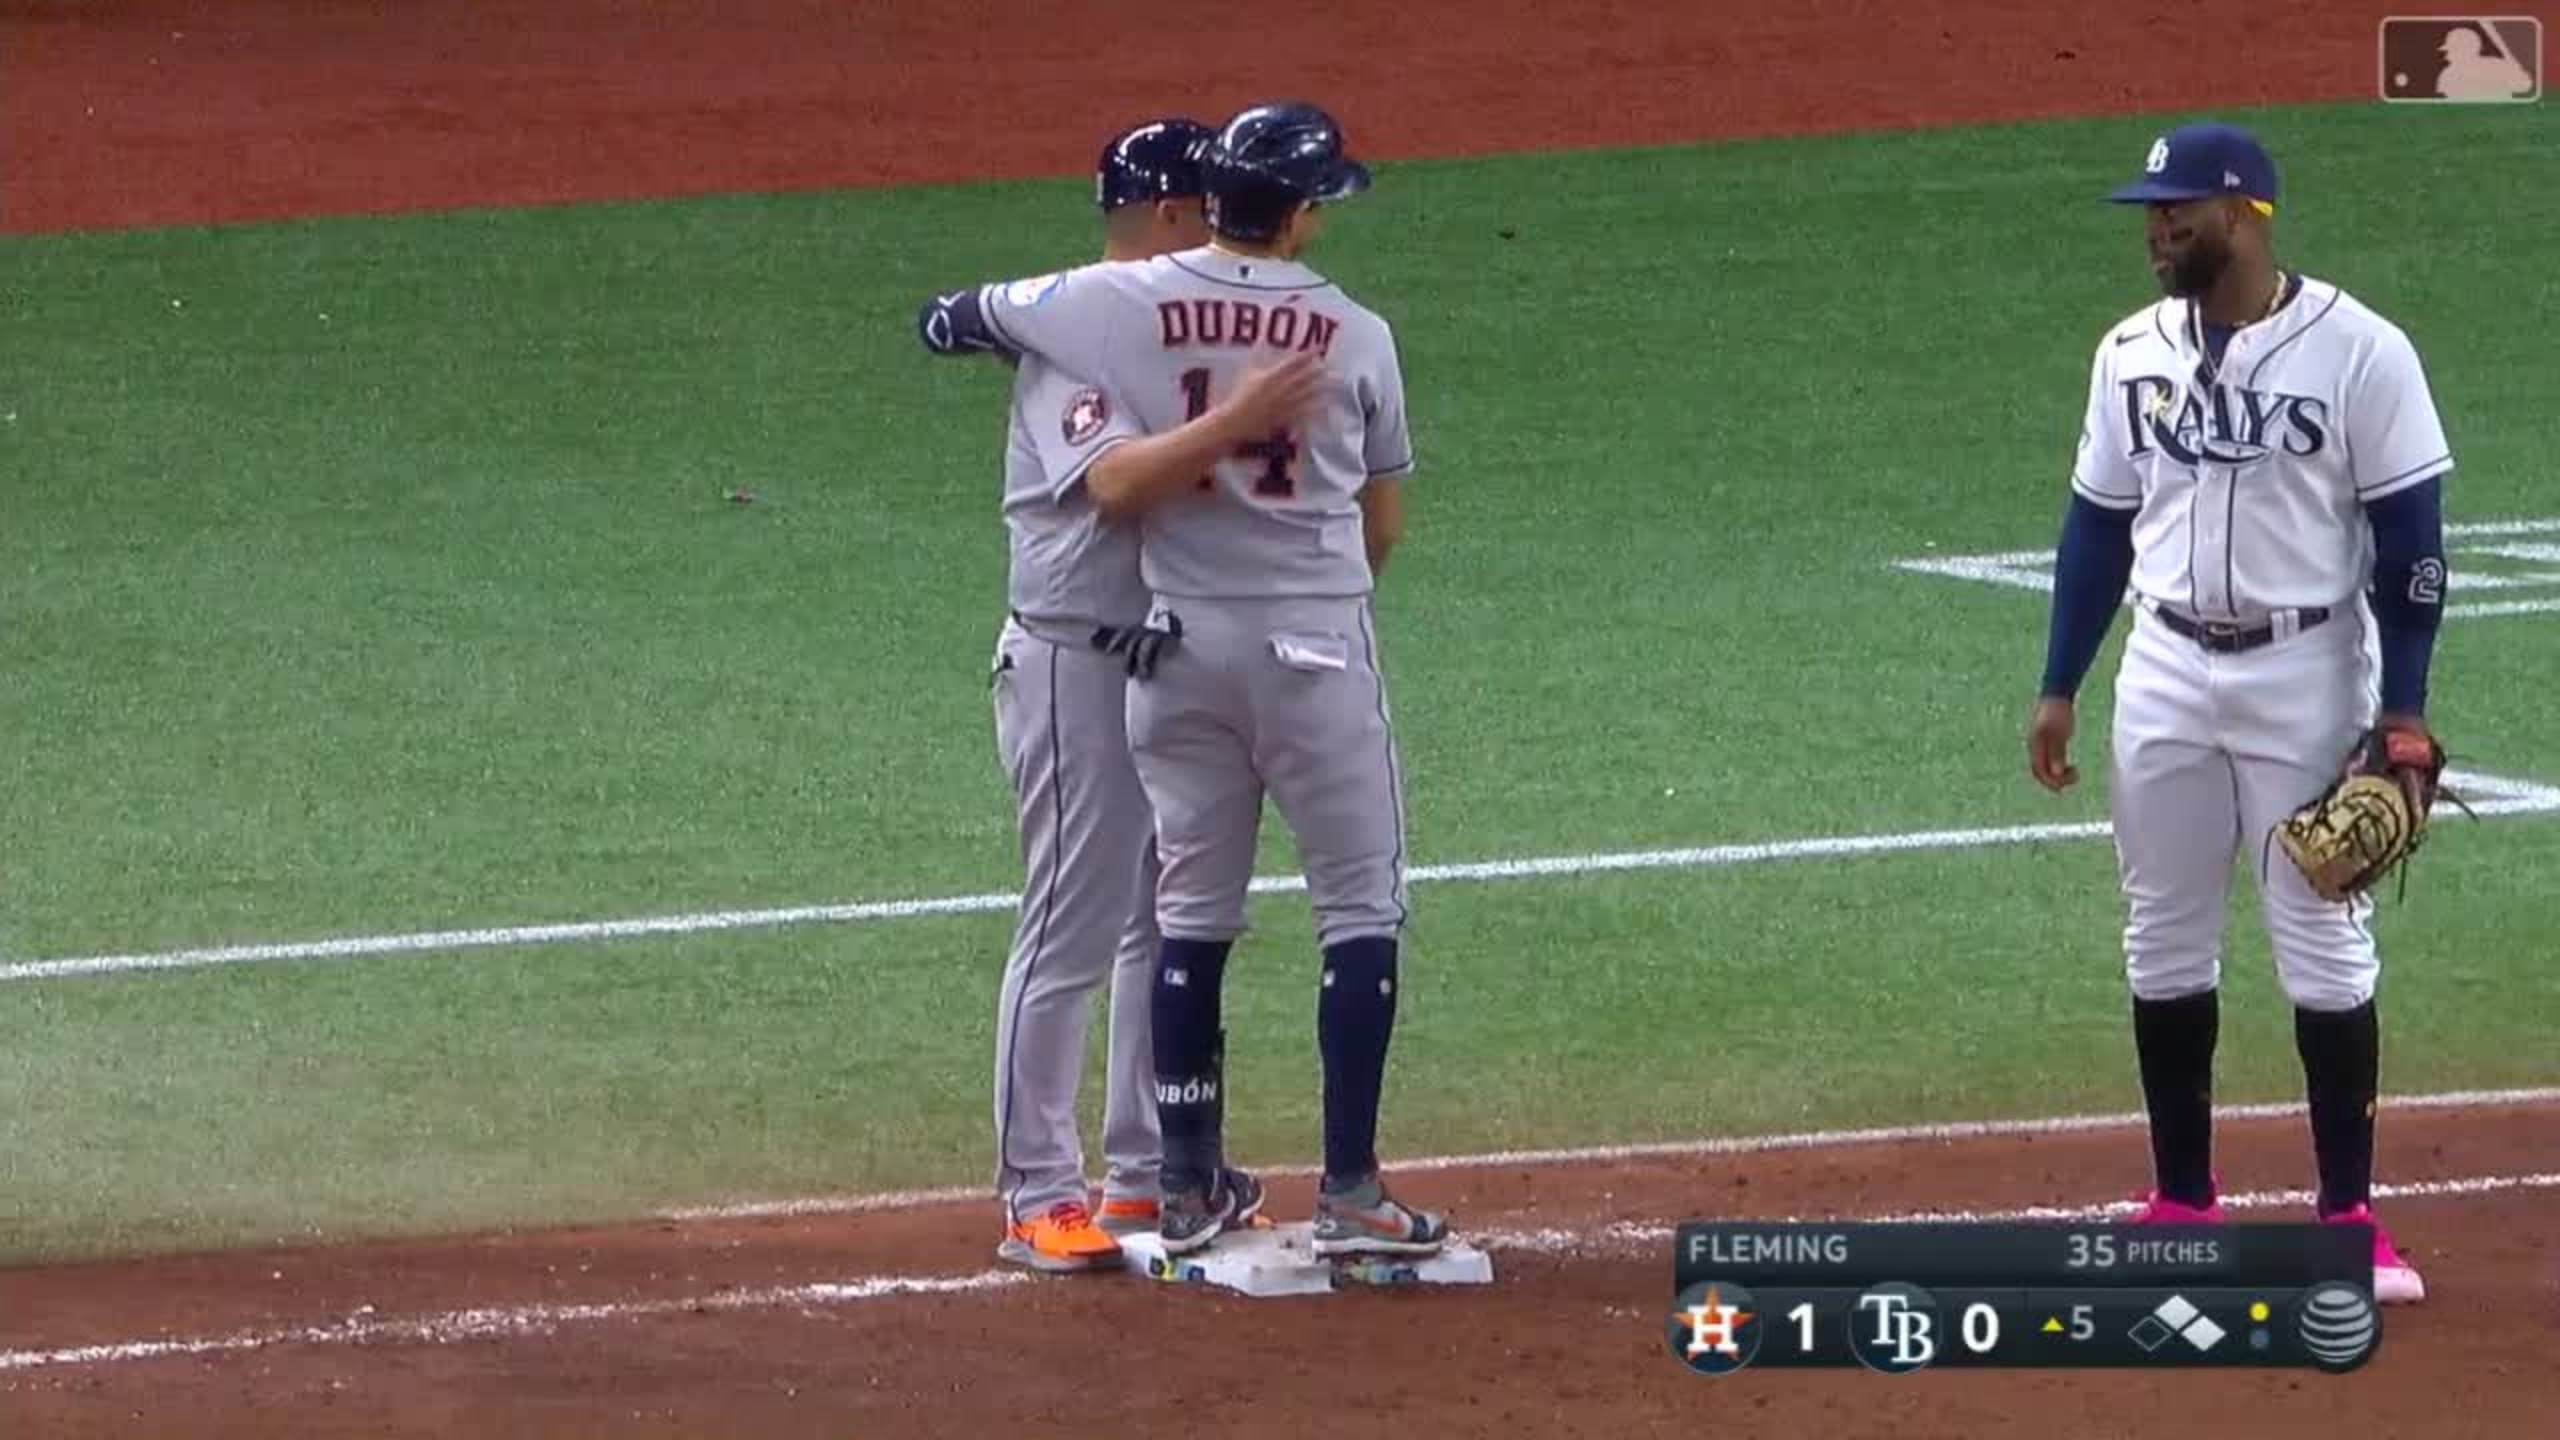 Mauricio Dubón continues to hit well for the Astros